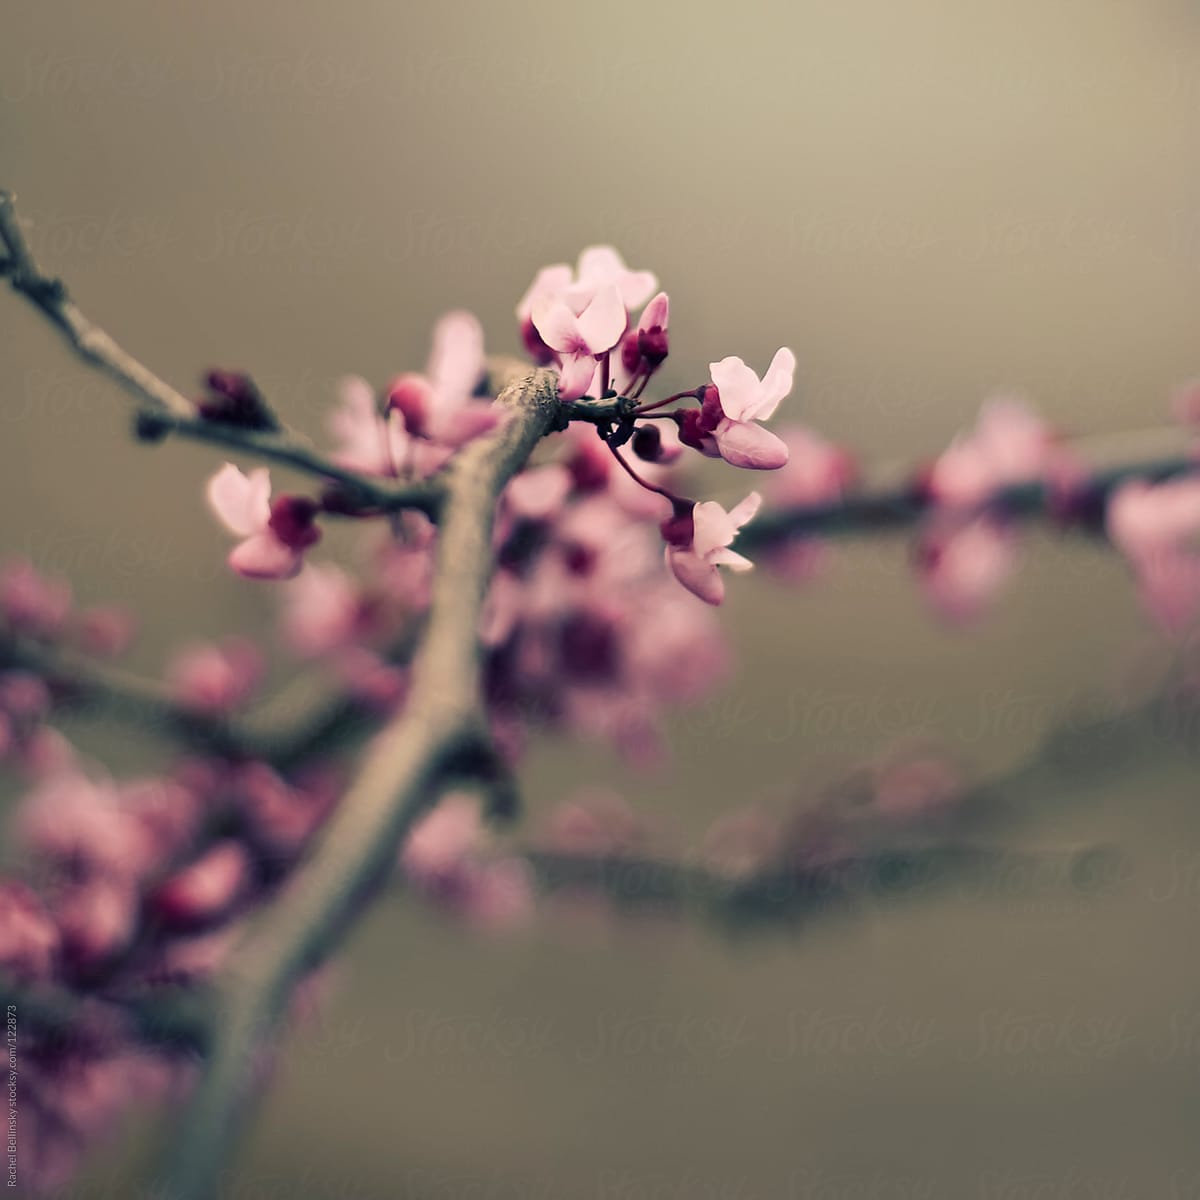 Newly sprouted pink cherry blossom branch against pale tan